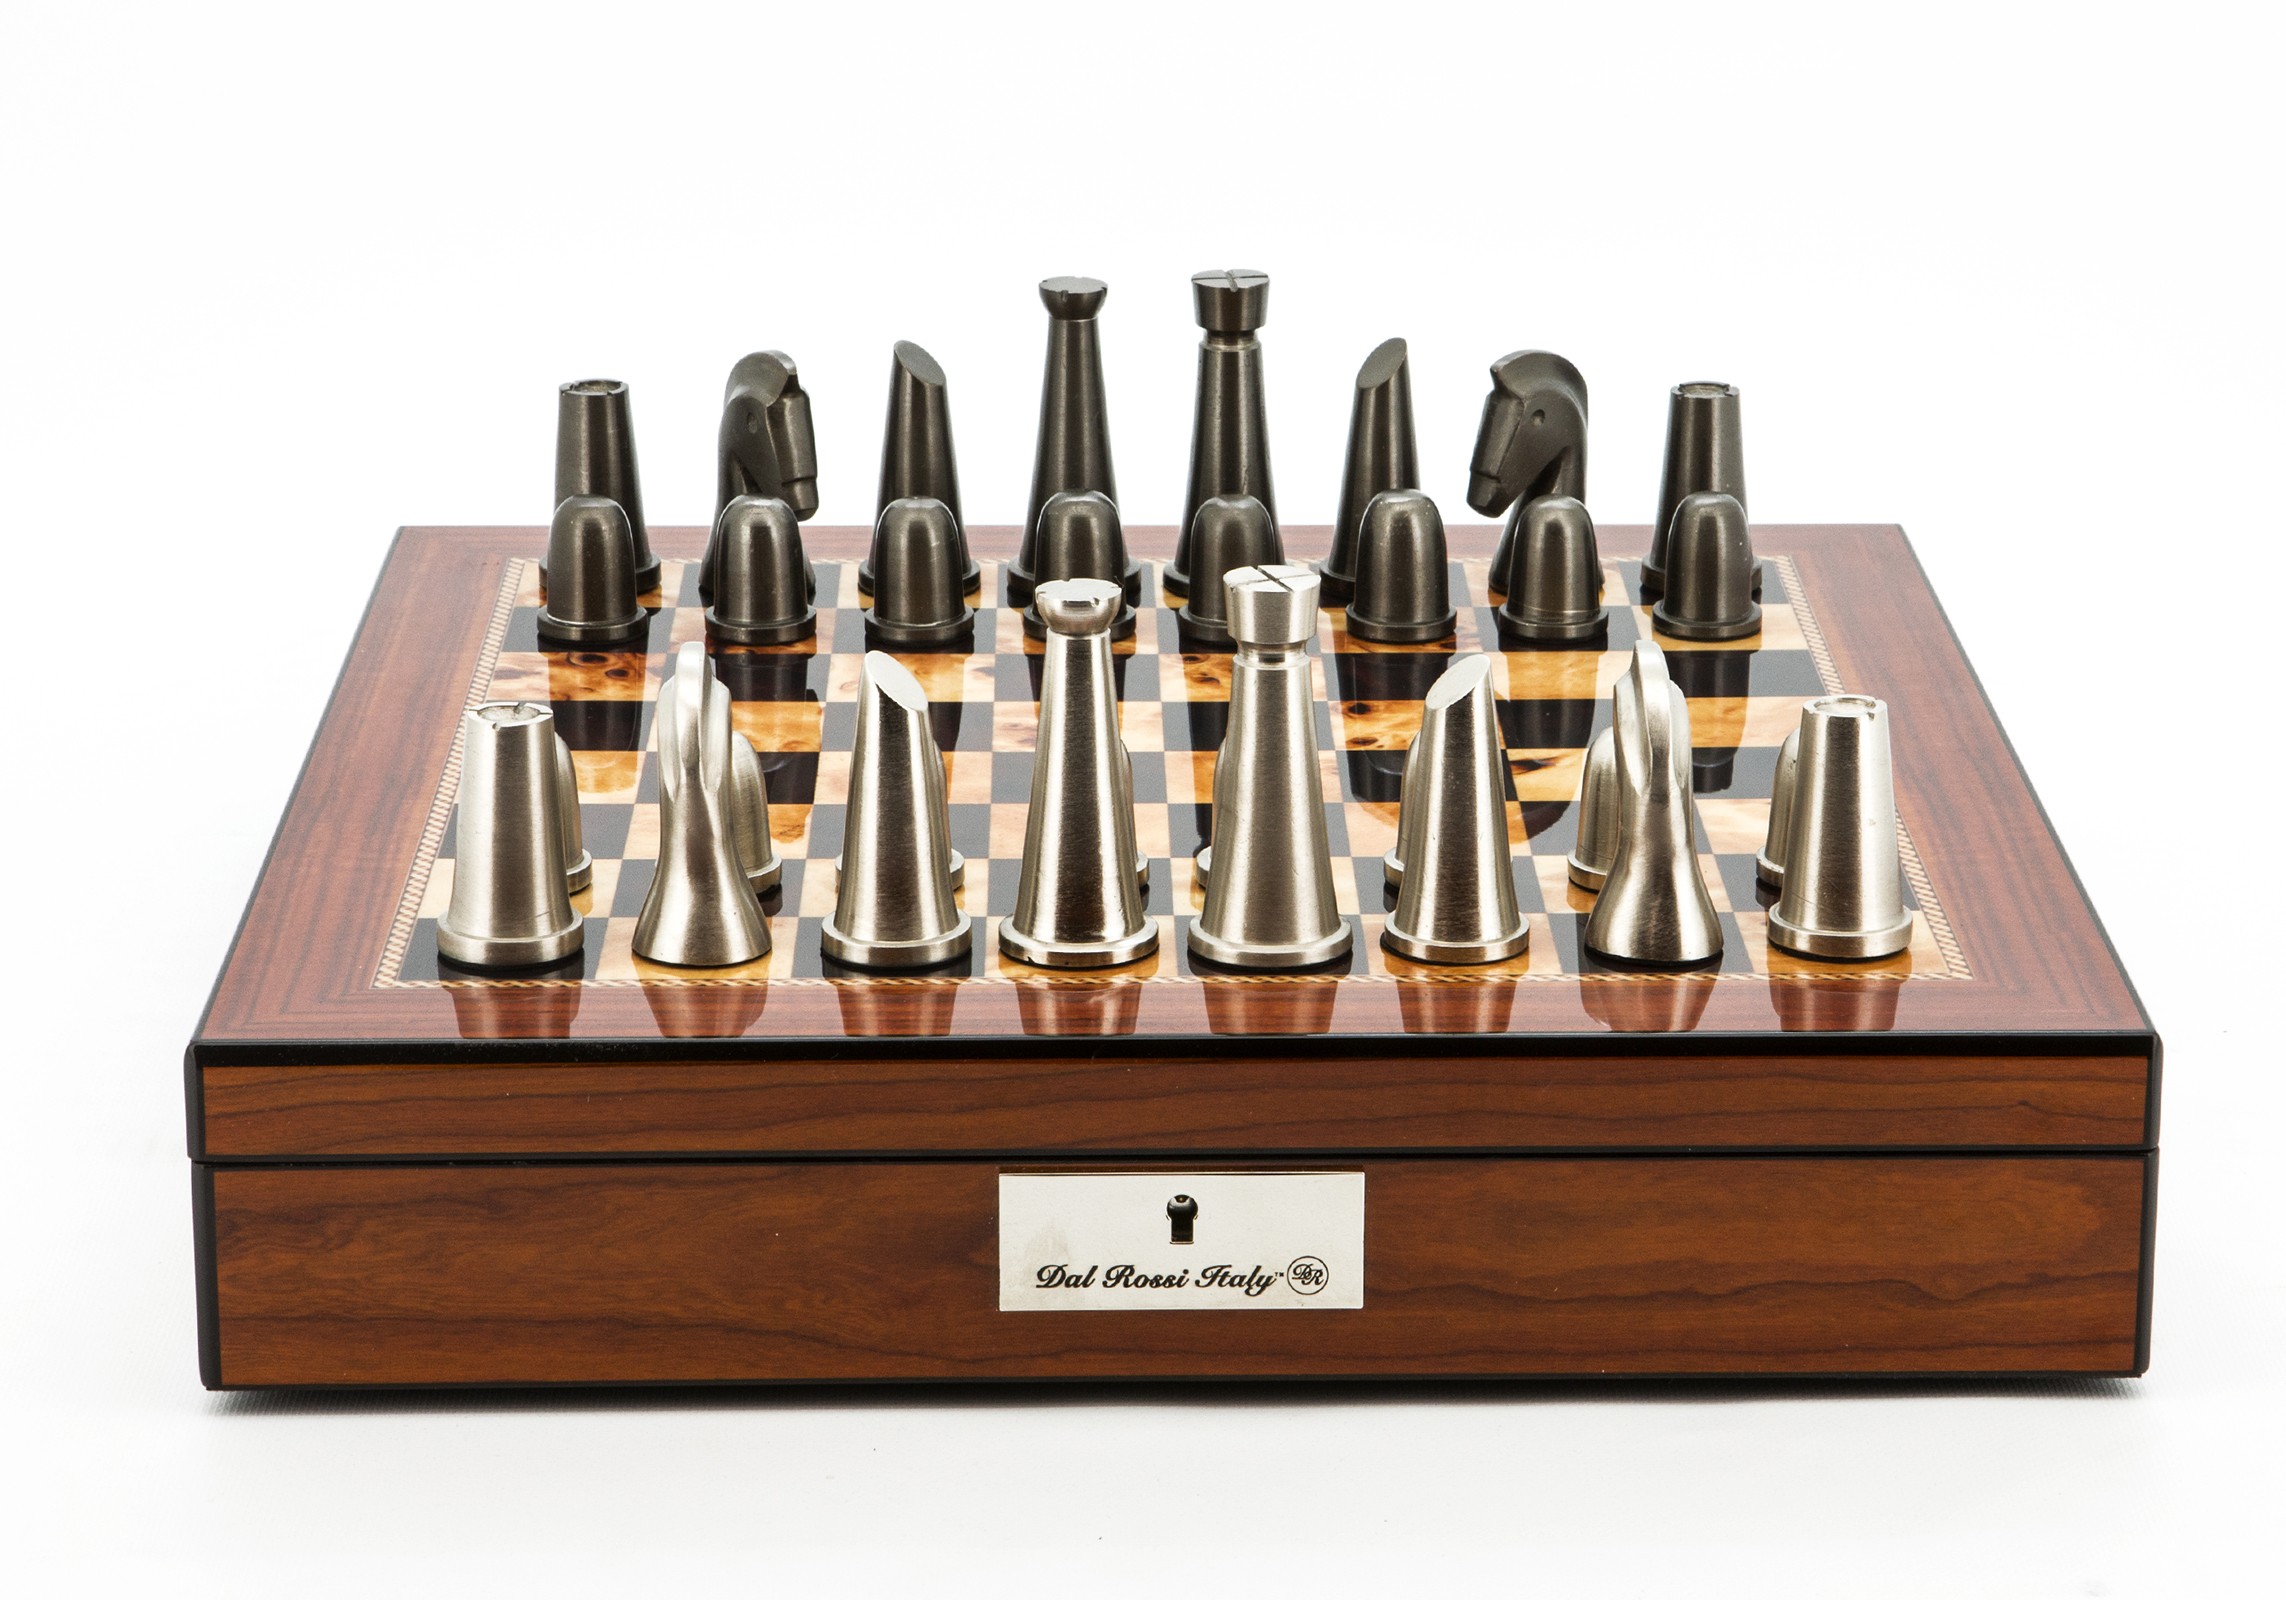 Dal Rossi Italy Chess Set Walnut Finish 16″ With Compartments, With Metal Dark Titanium and Silver chessmen 85mm